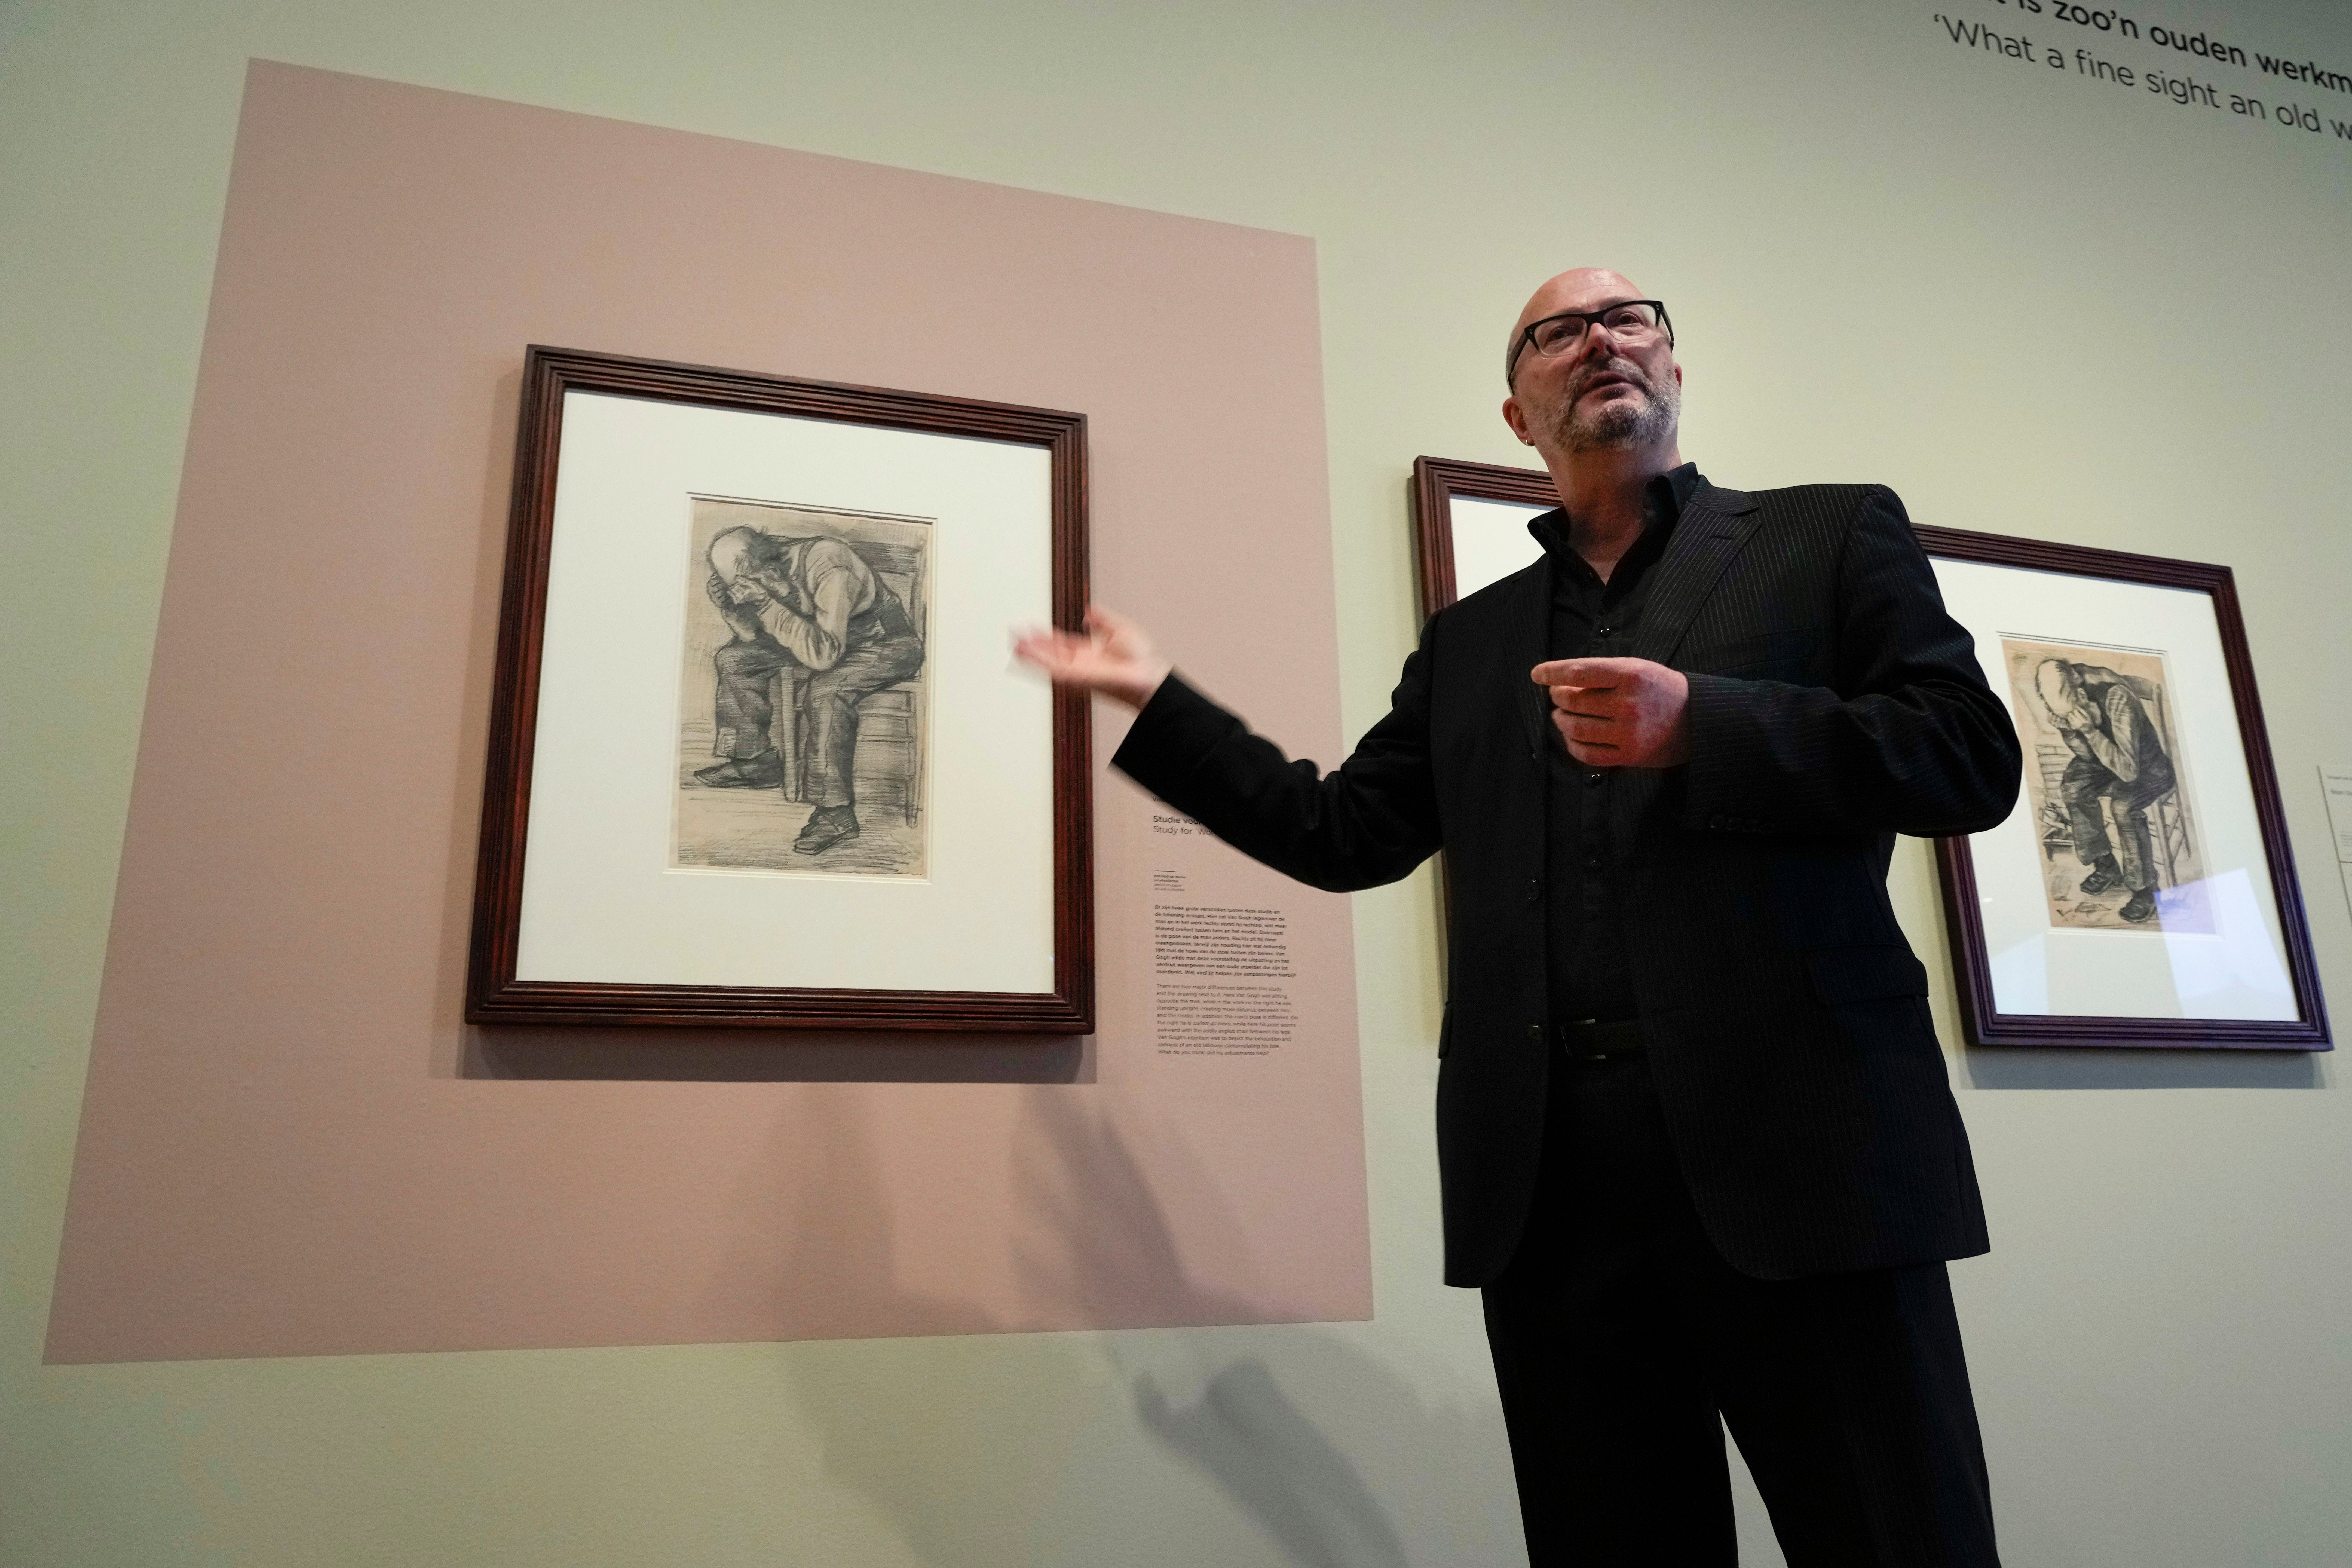 Senior researcher Teio Meedendorp gestures during the presentation of Study for "Worn Out", left, a drawing by Dutch master Vincent van Gogh, dated Nov. 1882, going on public display for the first time at the Van Gogh Museum in Amsterdam